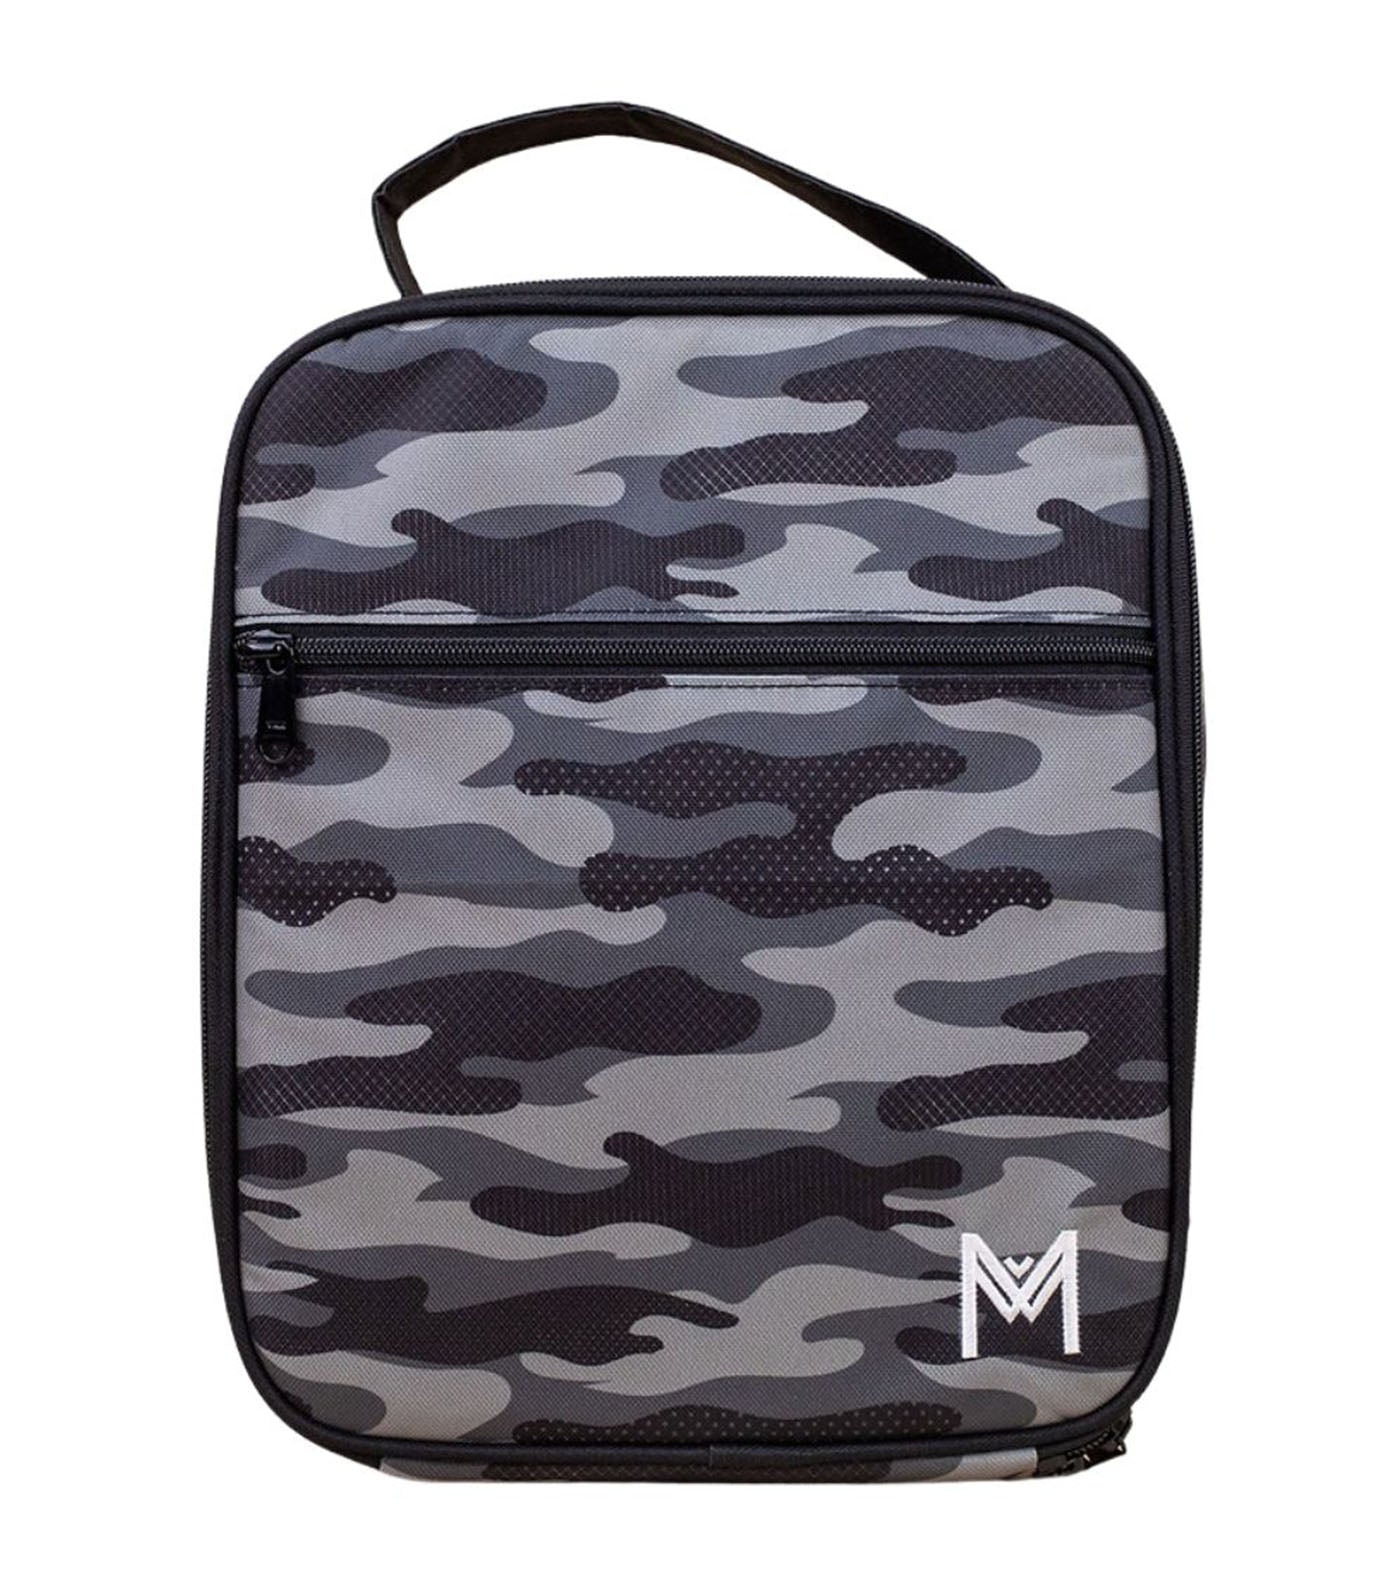 Large Insulated Lunch Bag - Combat